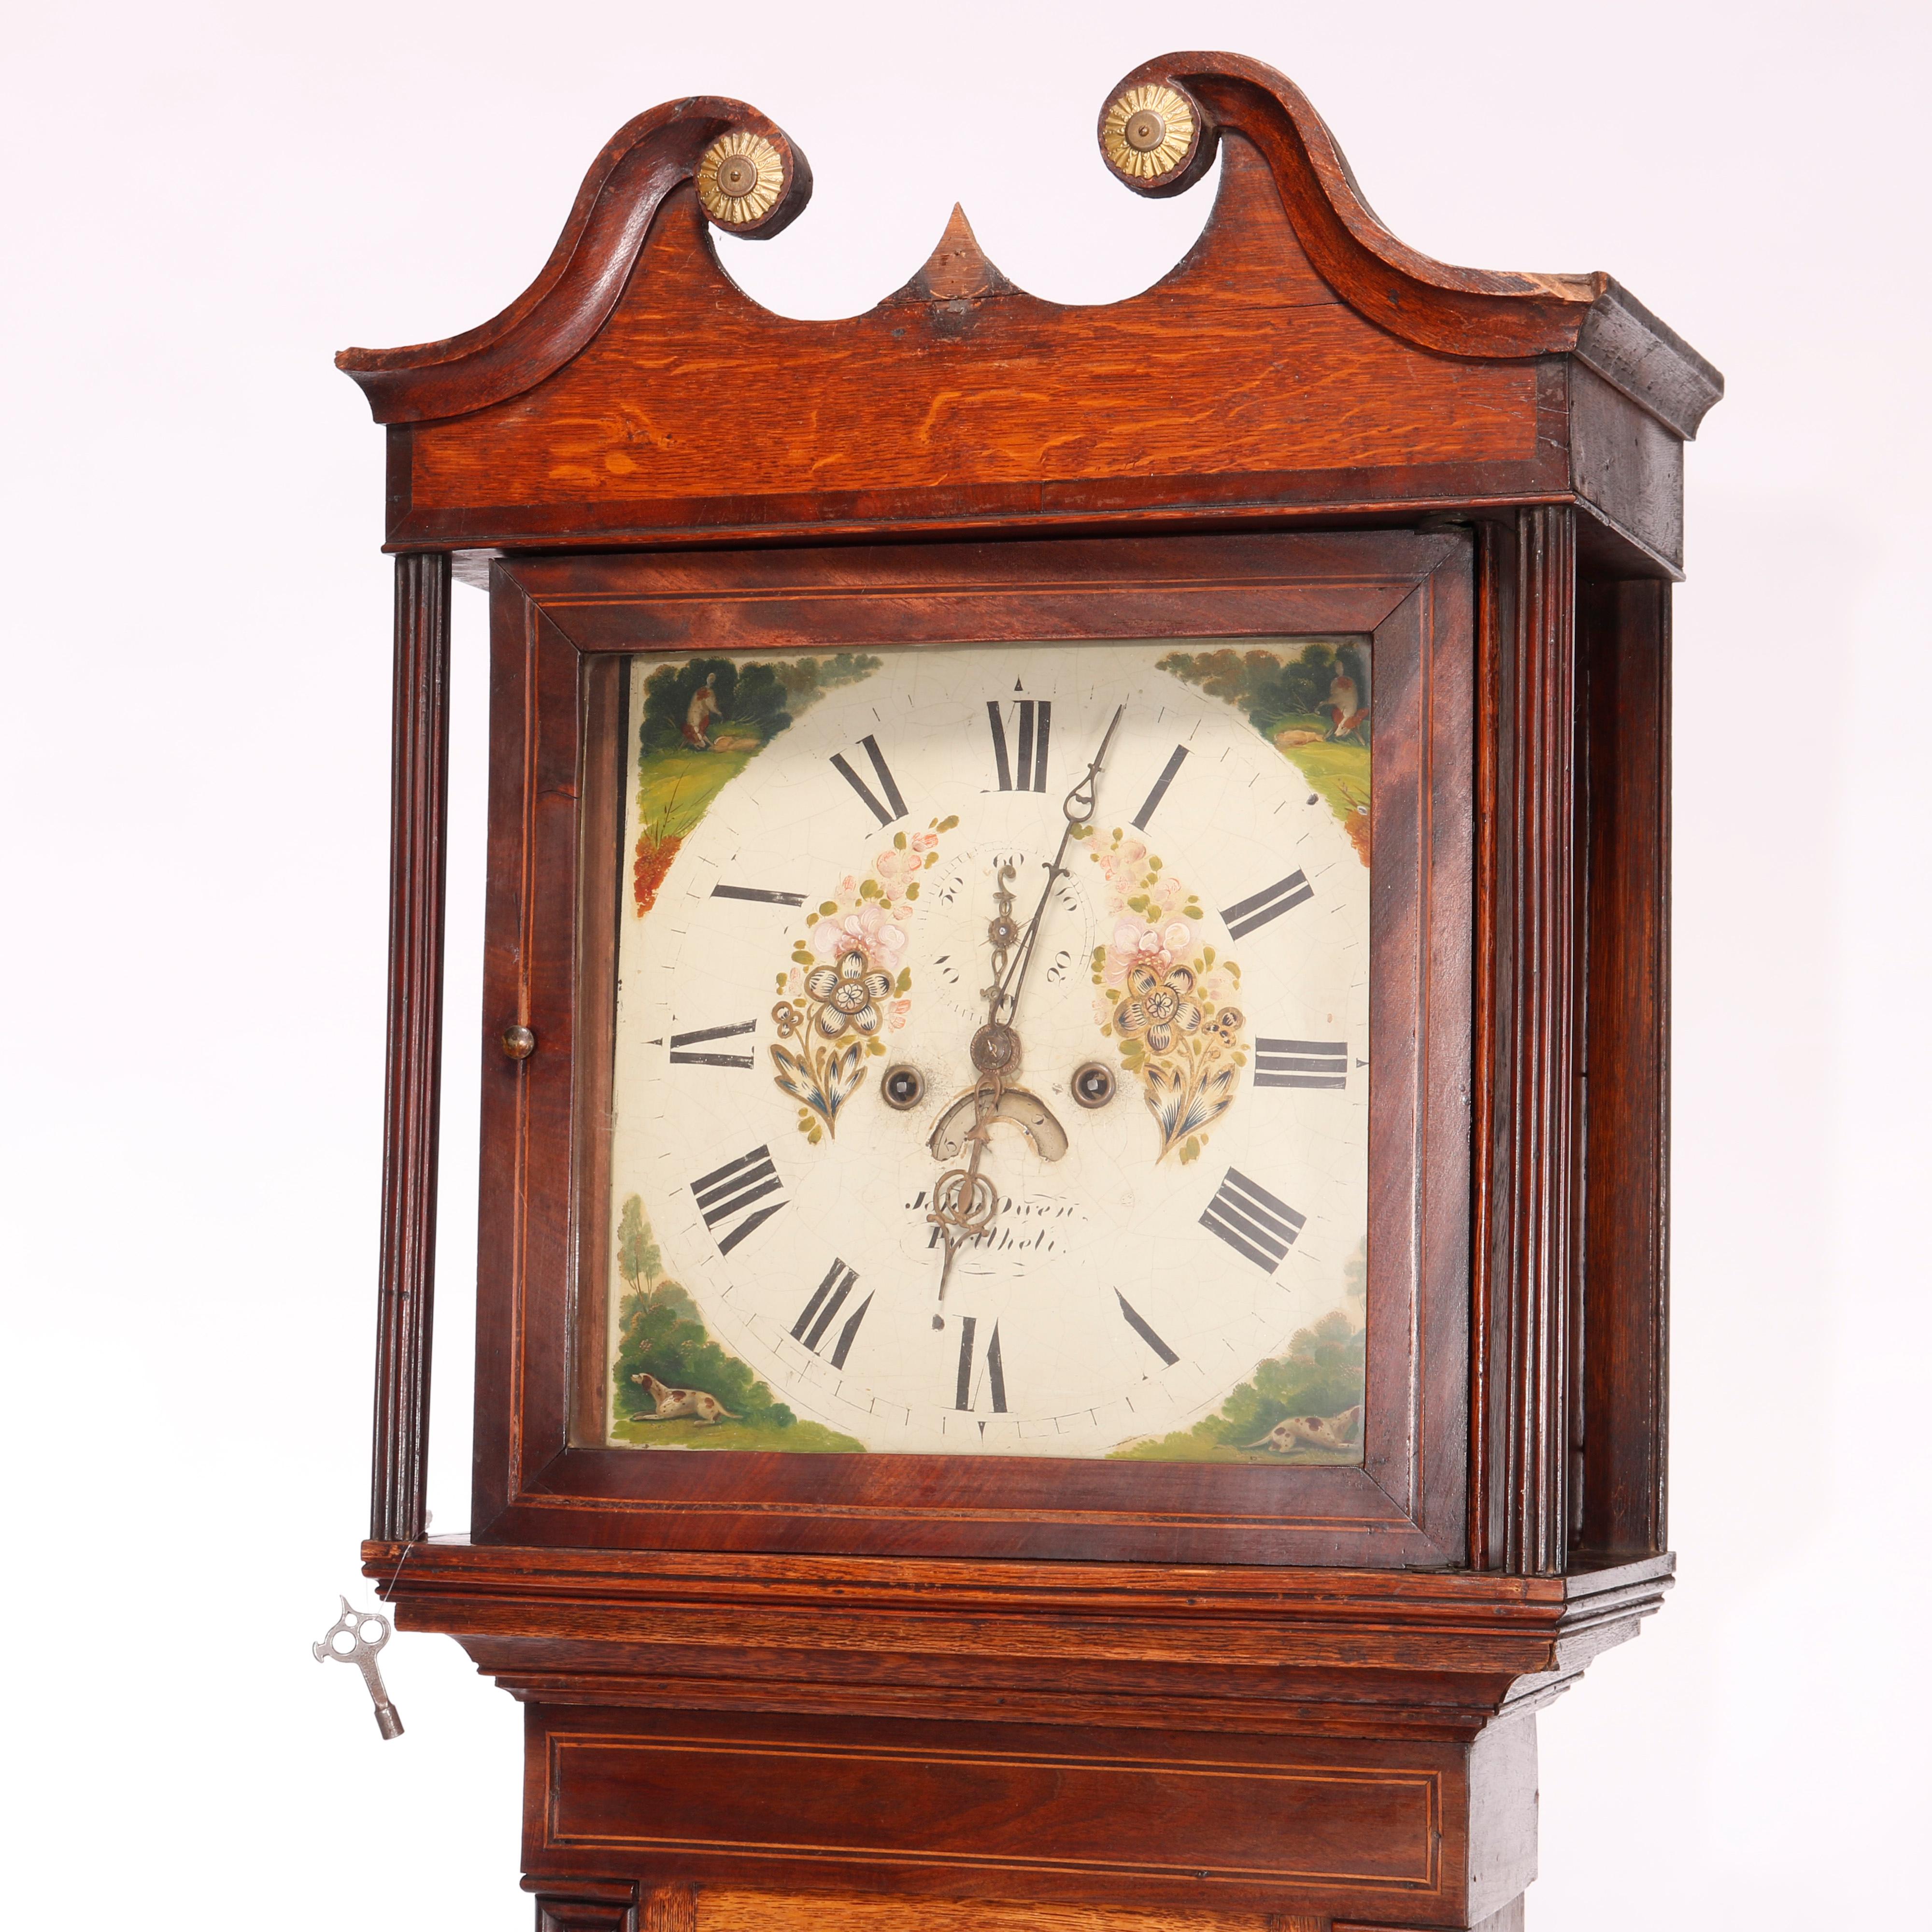 An English tall case clock by John Owen offers oak and mahogany banded case with broken arch crest over hand painted face with signature, non-working, c1820

Measures - 81.75'' H x 20.75'' W x 9.5'' D.